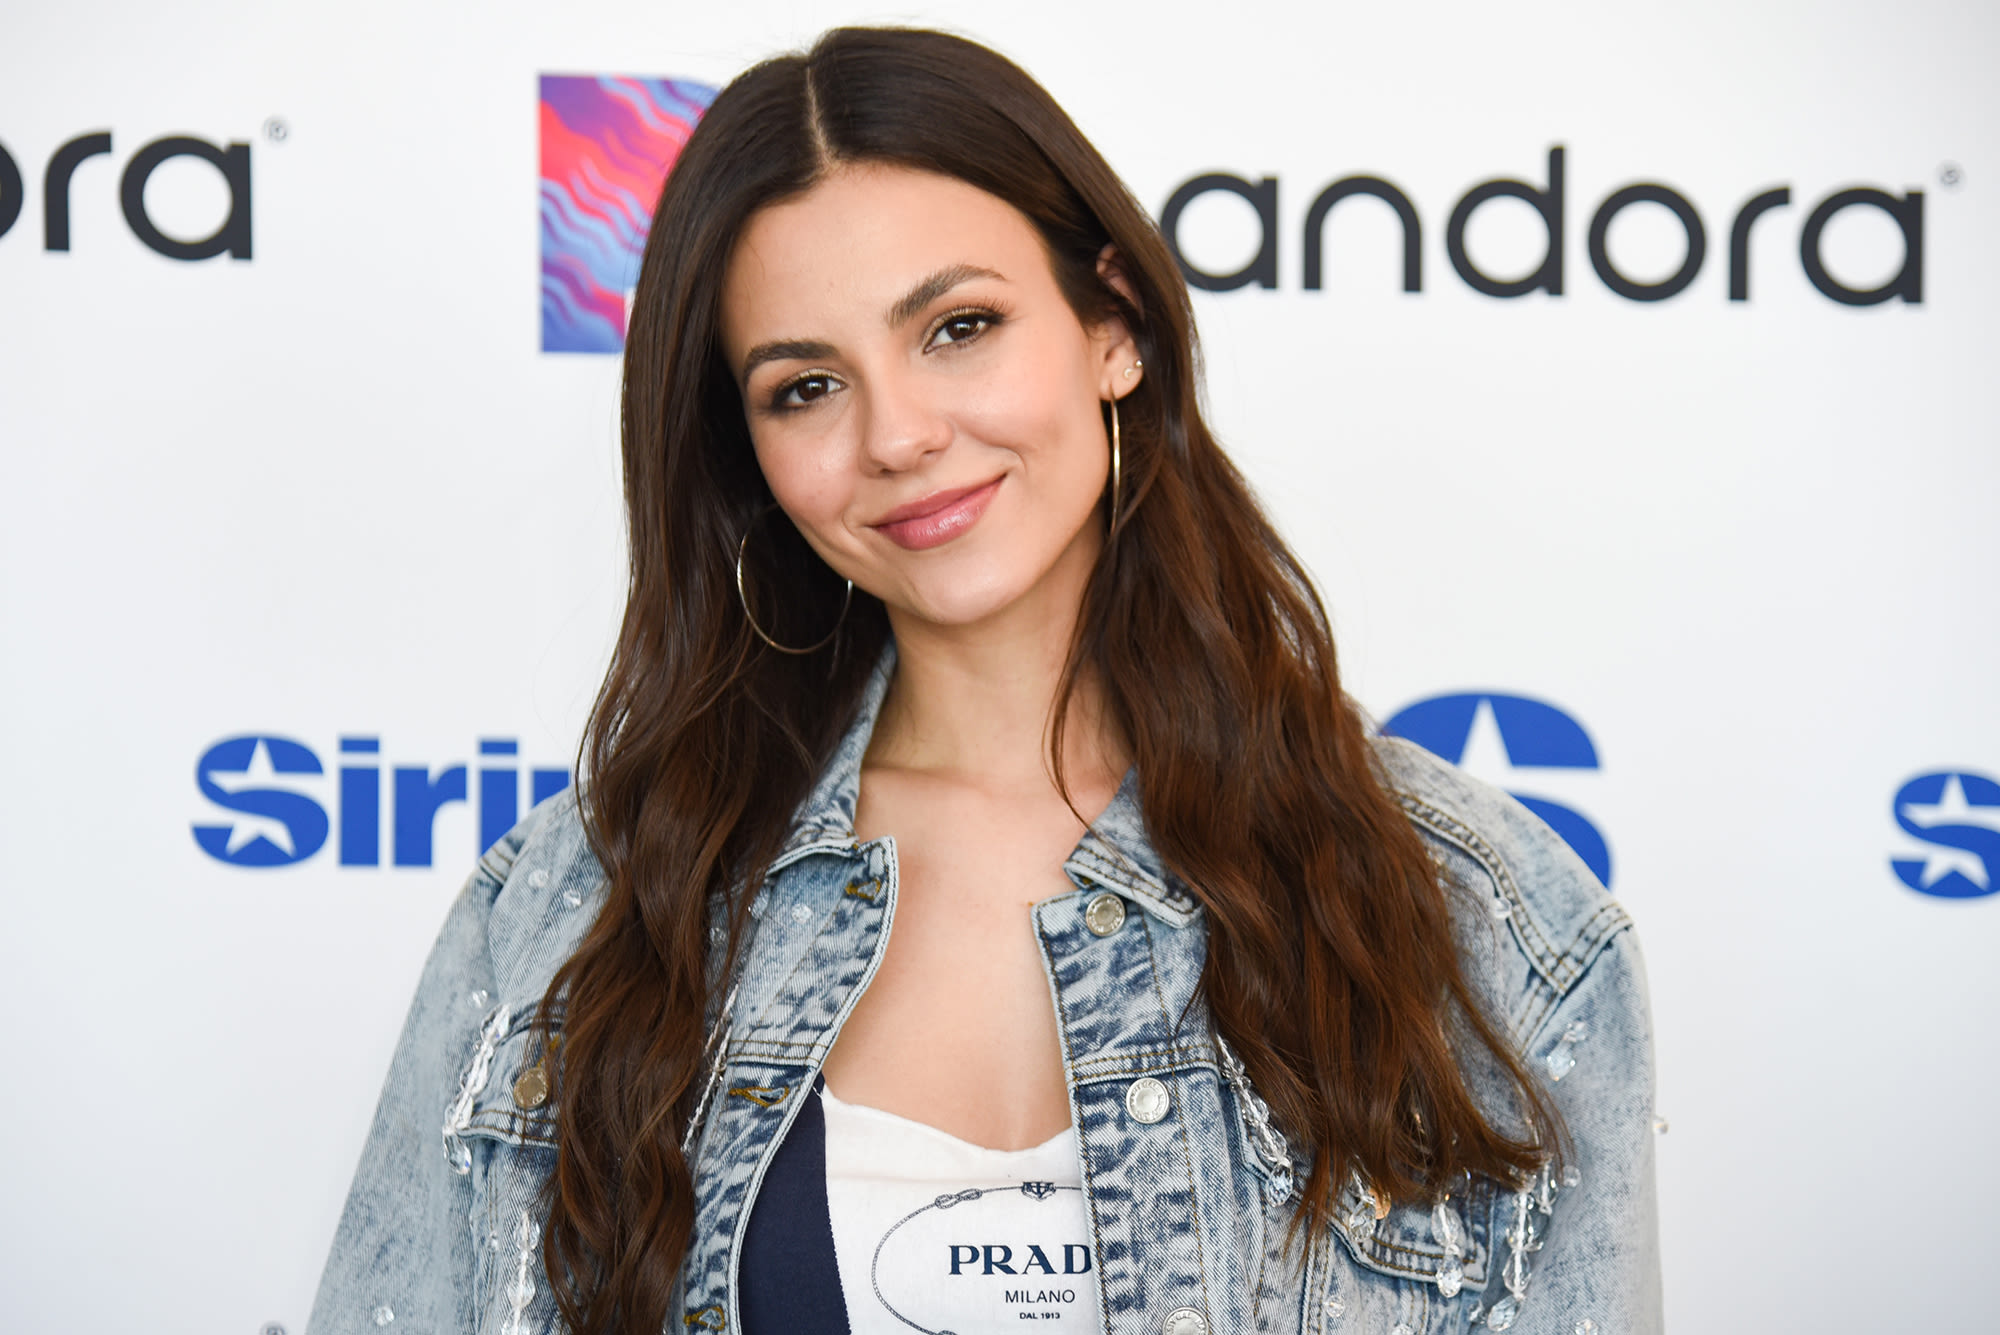 Victoria Justice Loves This $10 Mascara So Much, She Refuses to Use Any Other